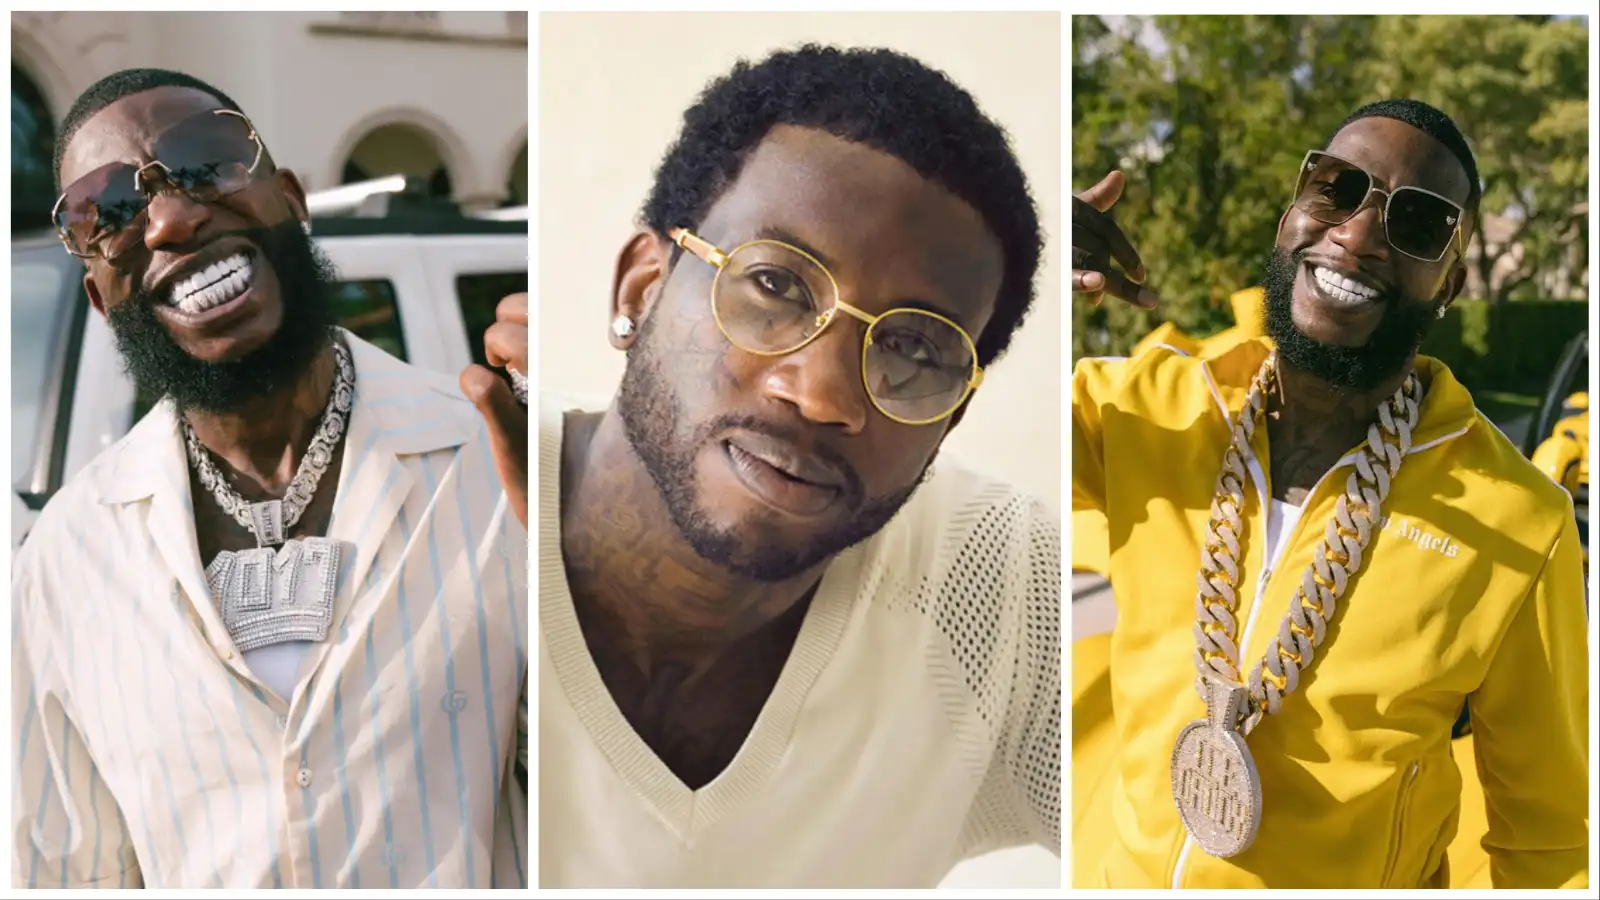 Gucci-Mane-Net-Worth-2023-Annual-Income-Age-Height-Family-House-Cars-etc.